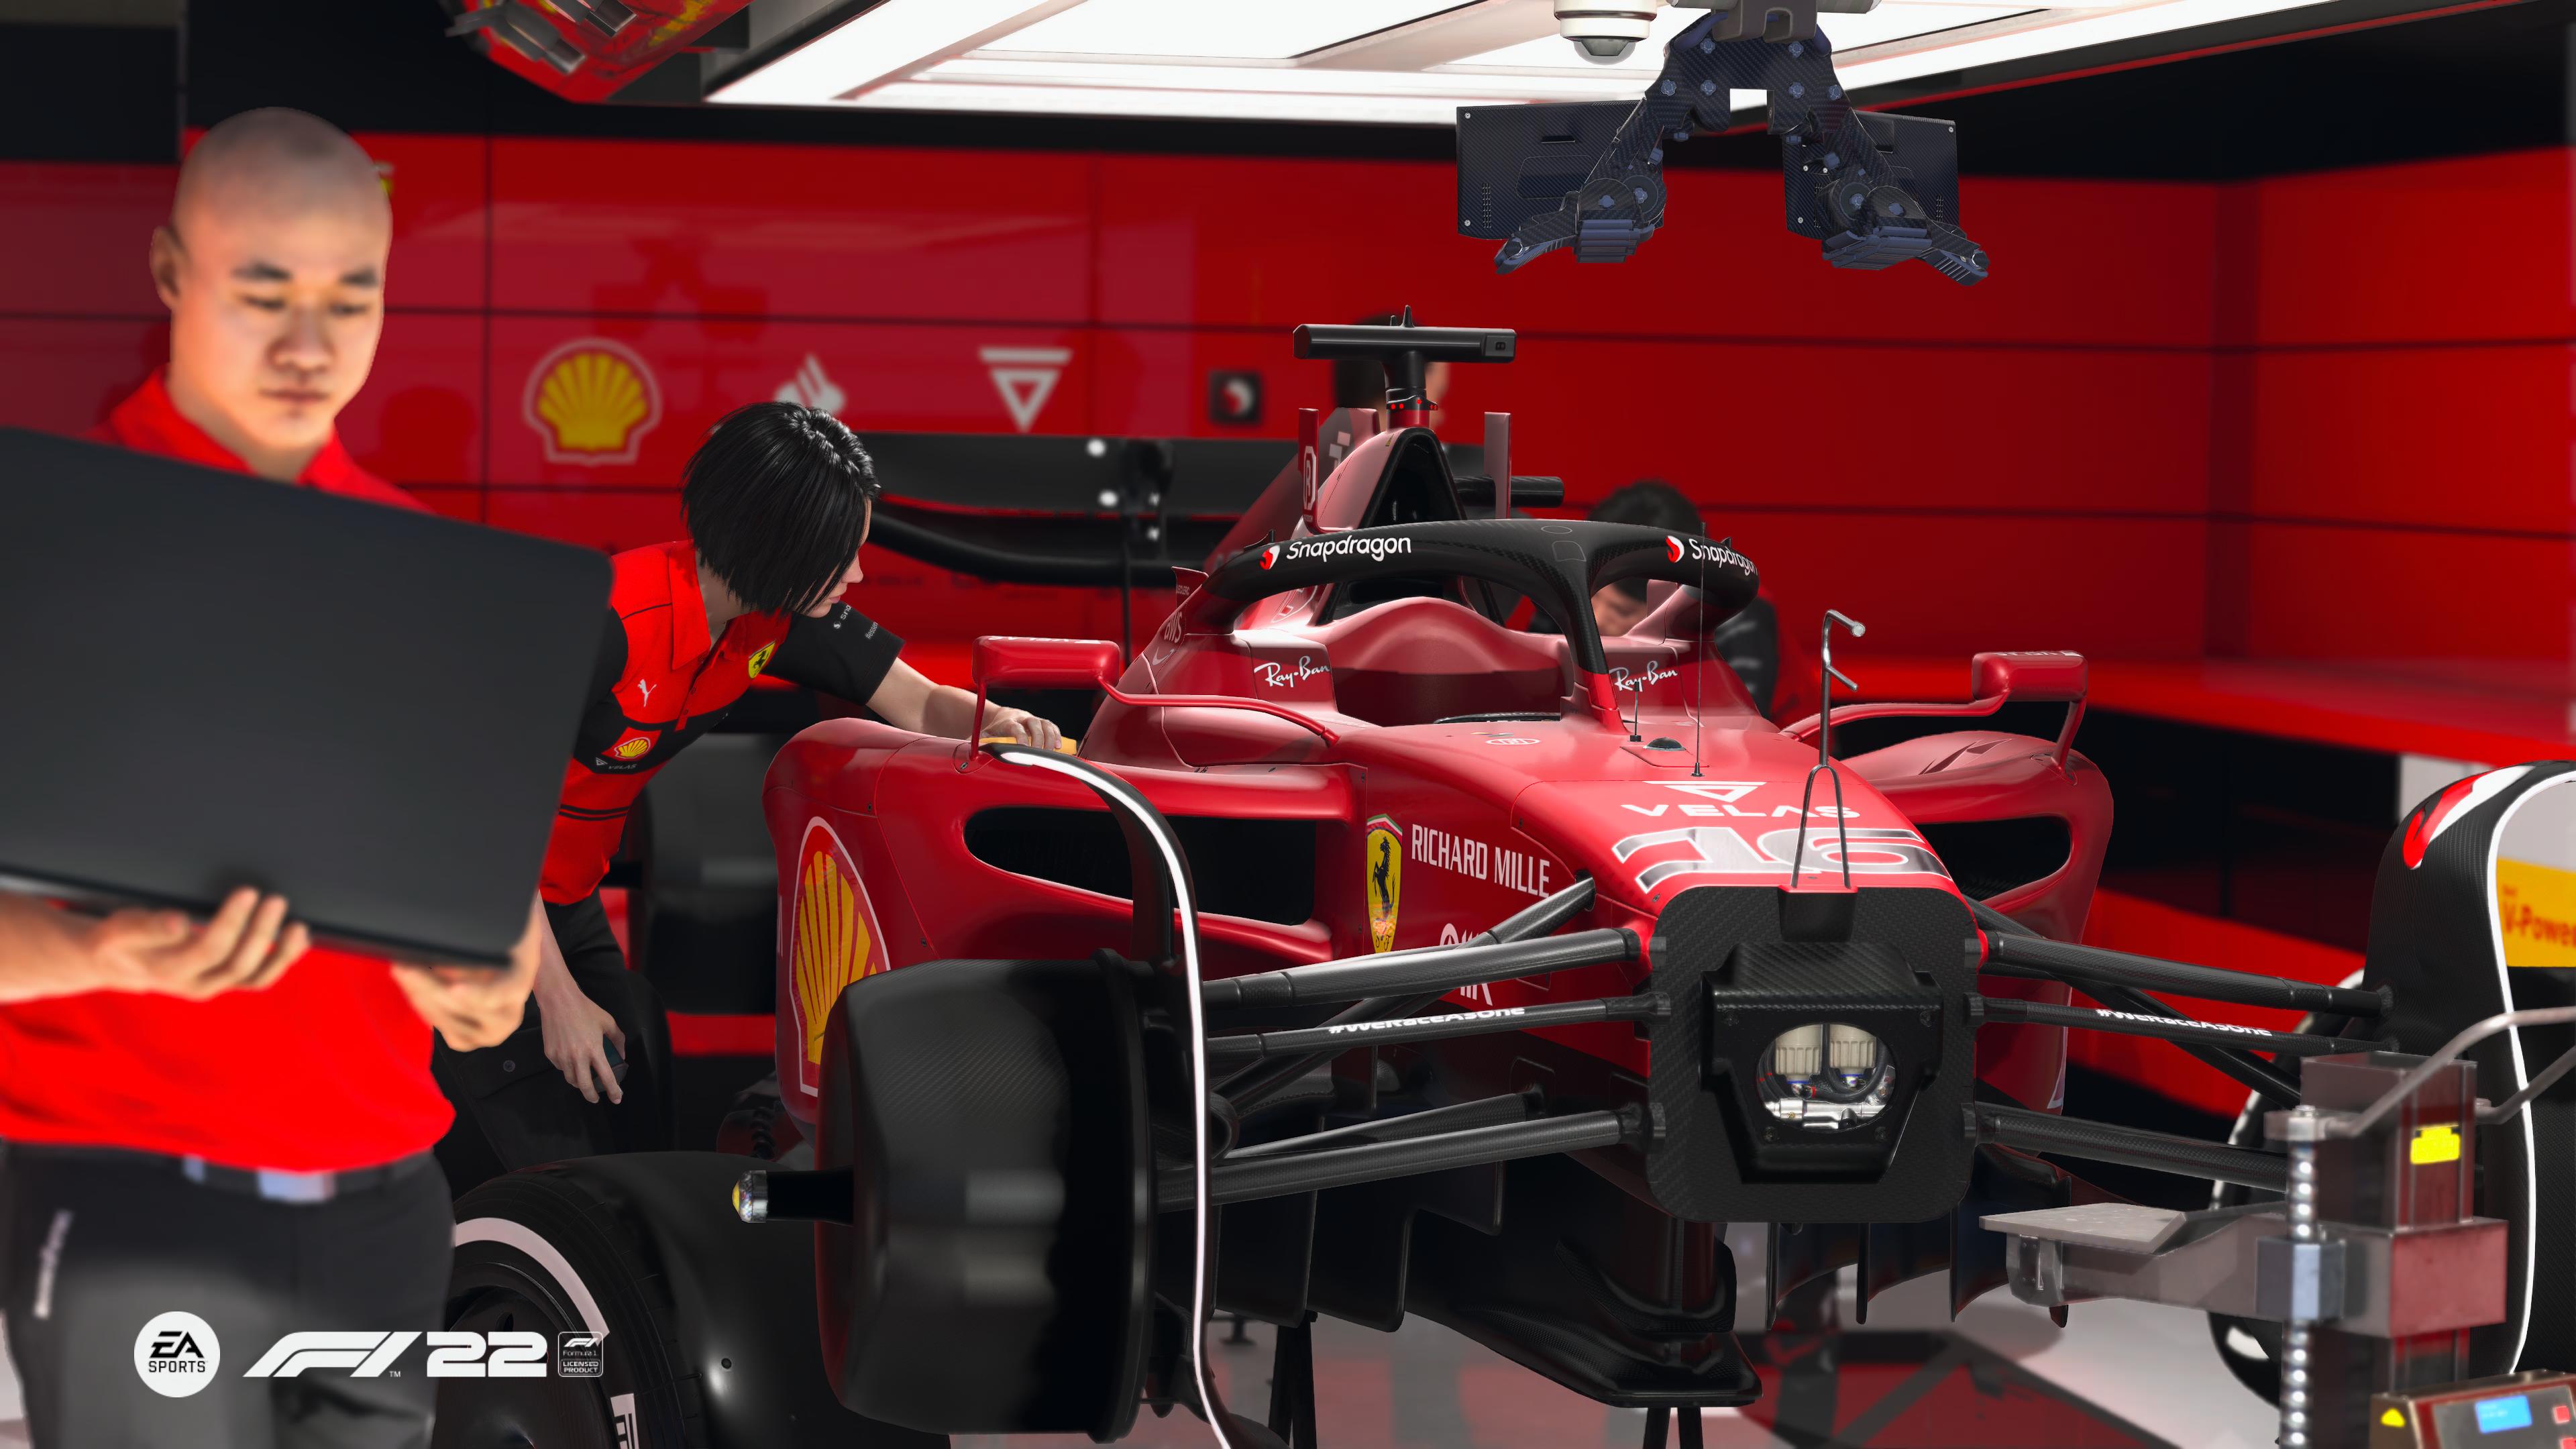 The F1 22 game now has more life-like liveries and car models